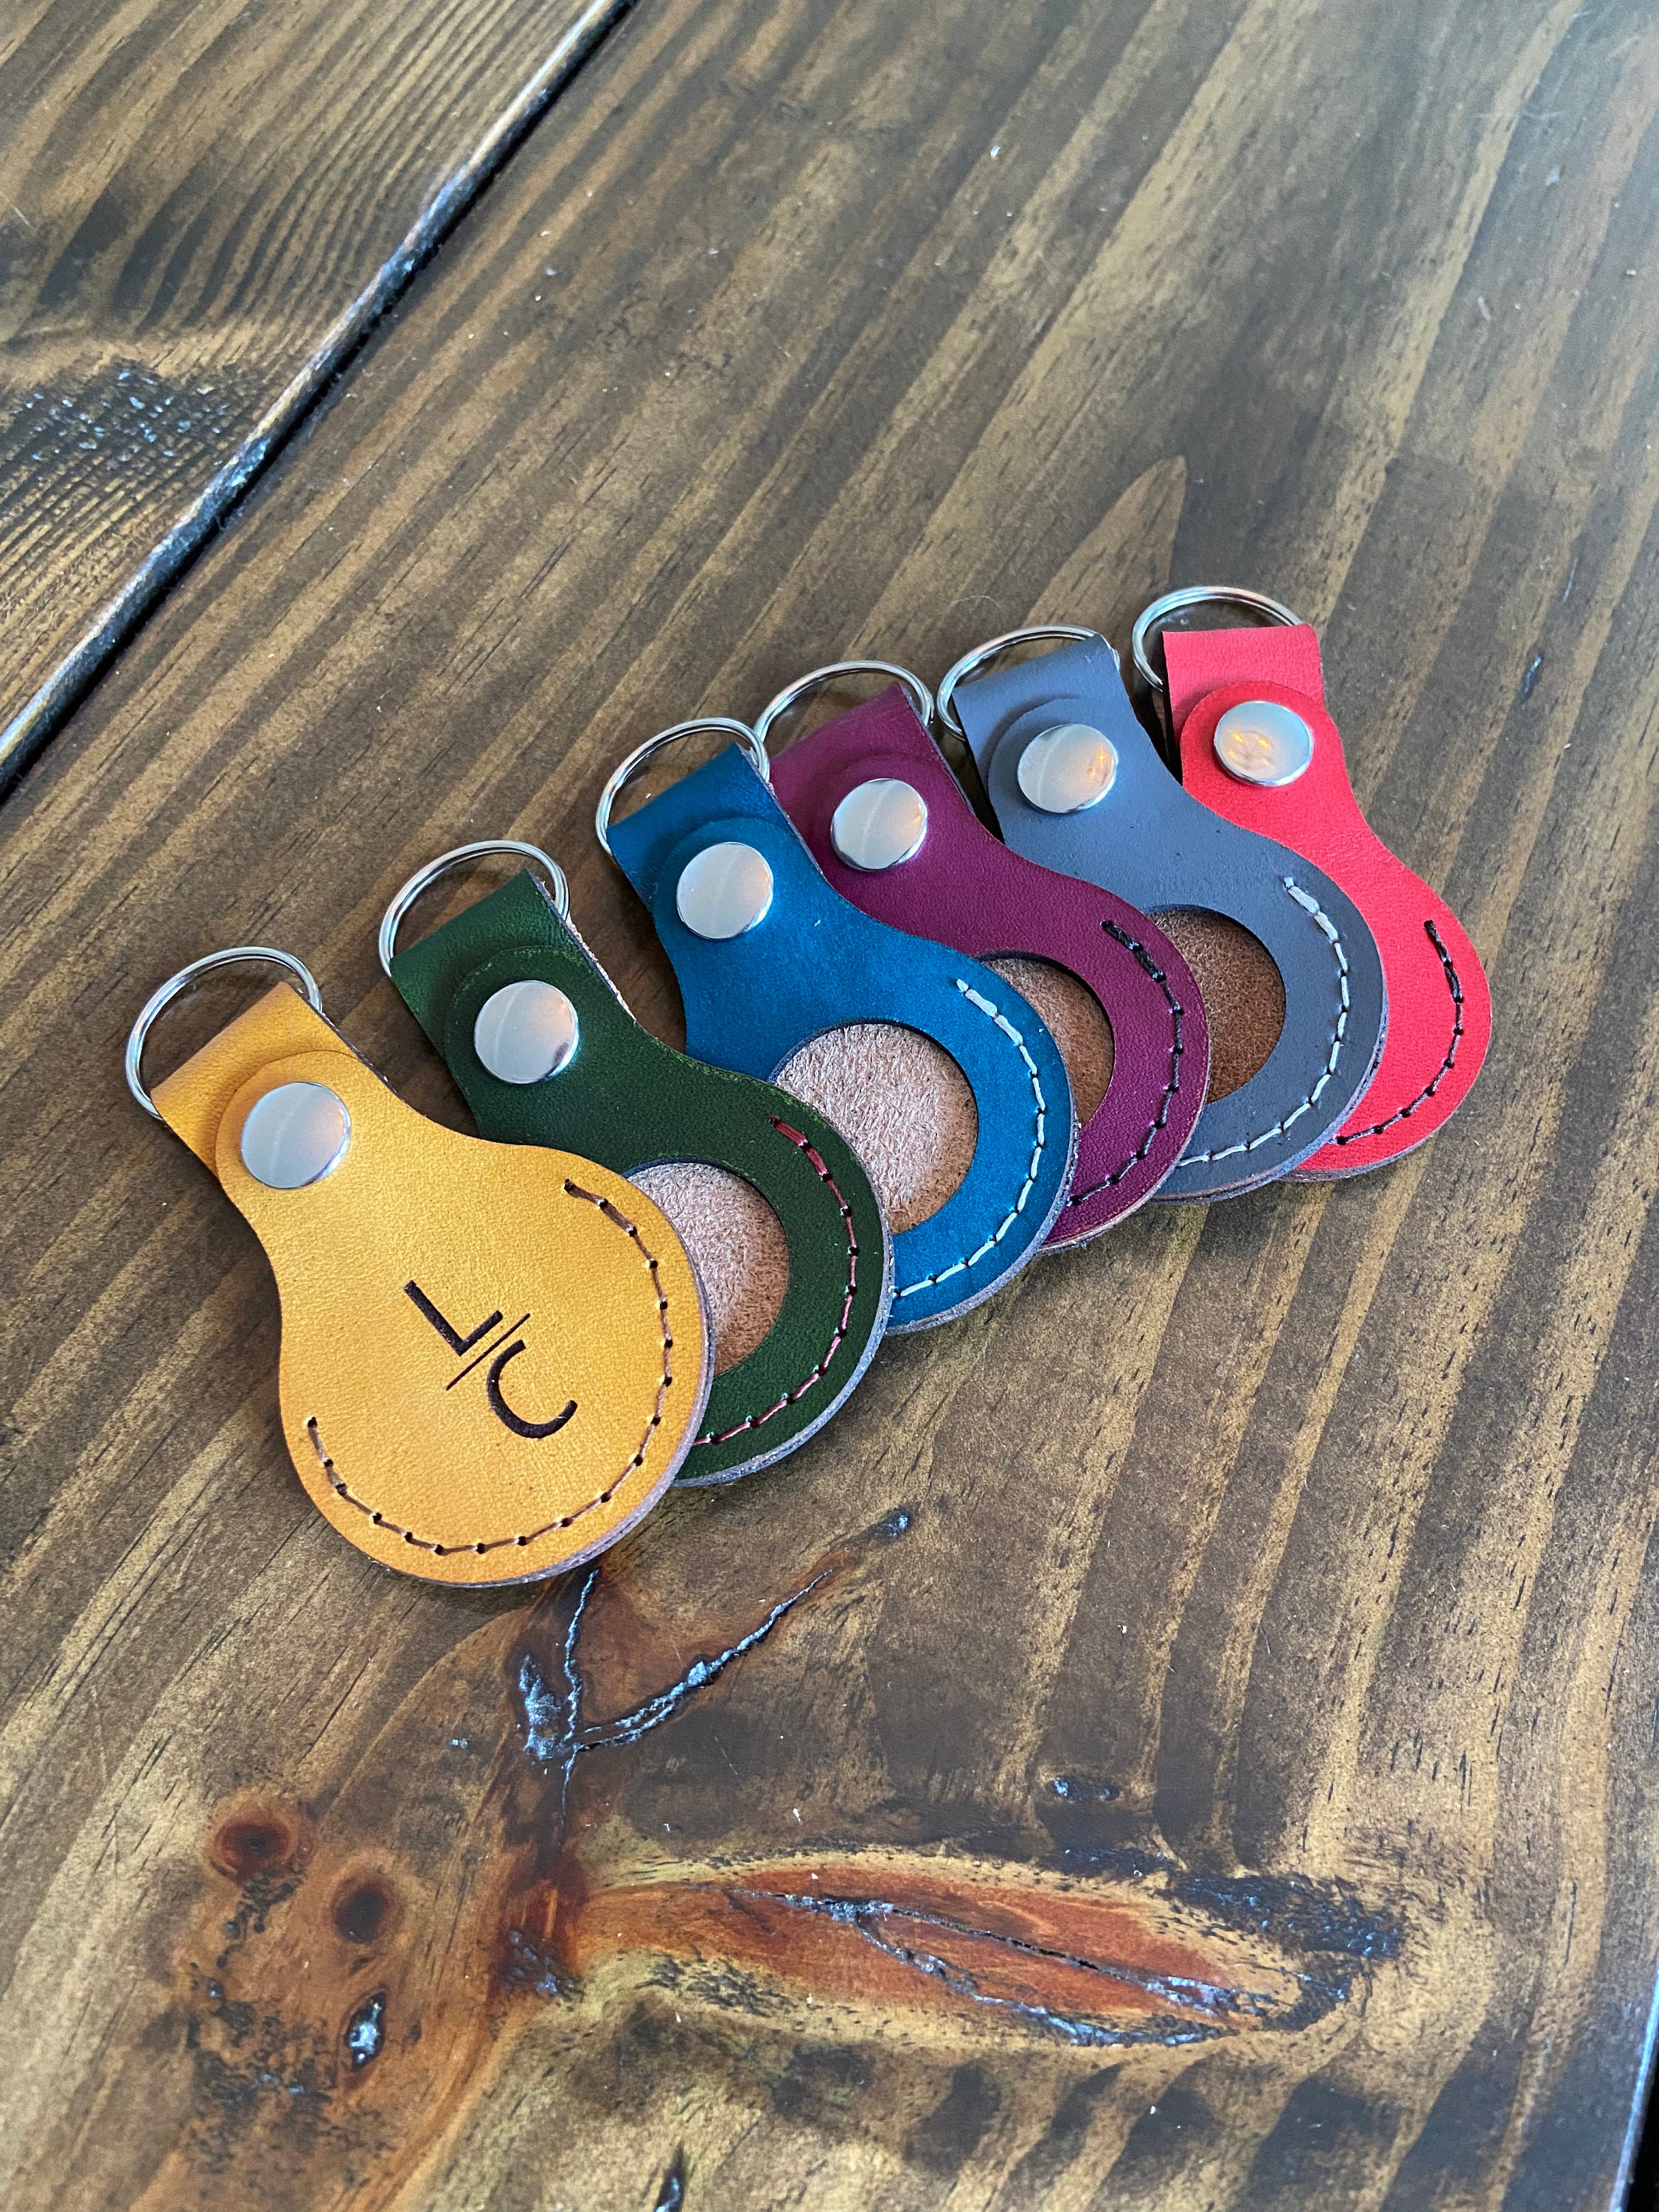 Norway Airtags, Leather AirTag Leather Keychain, Case, Leather Airtags Keyring Etsy AirTag - Case